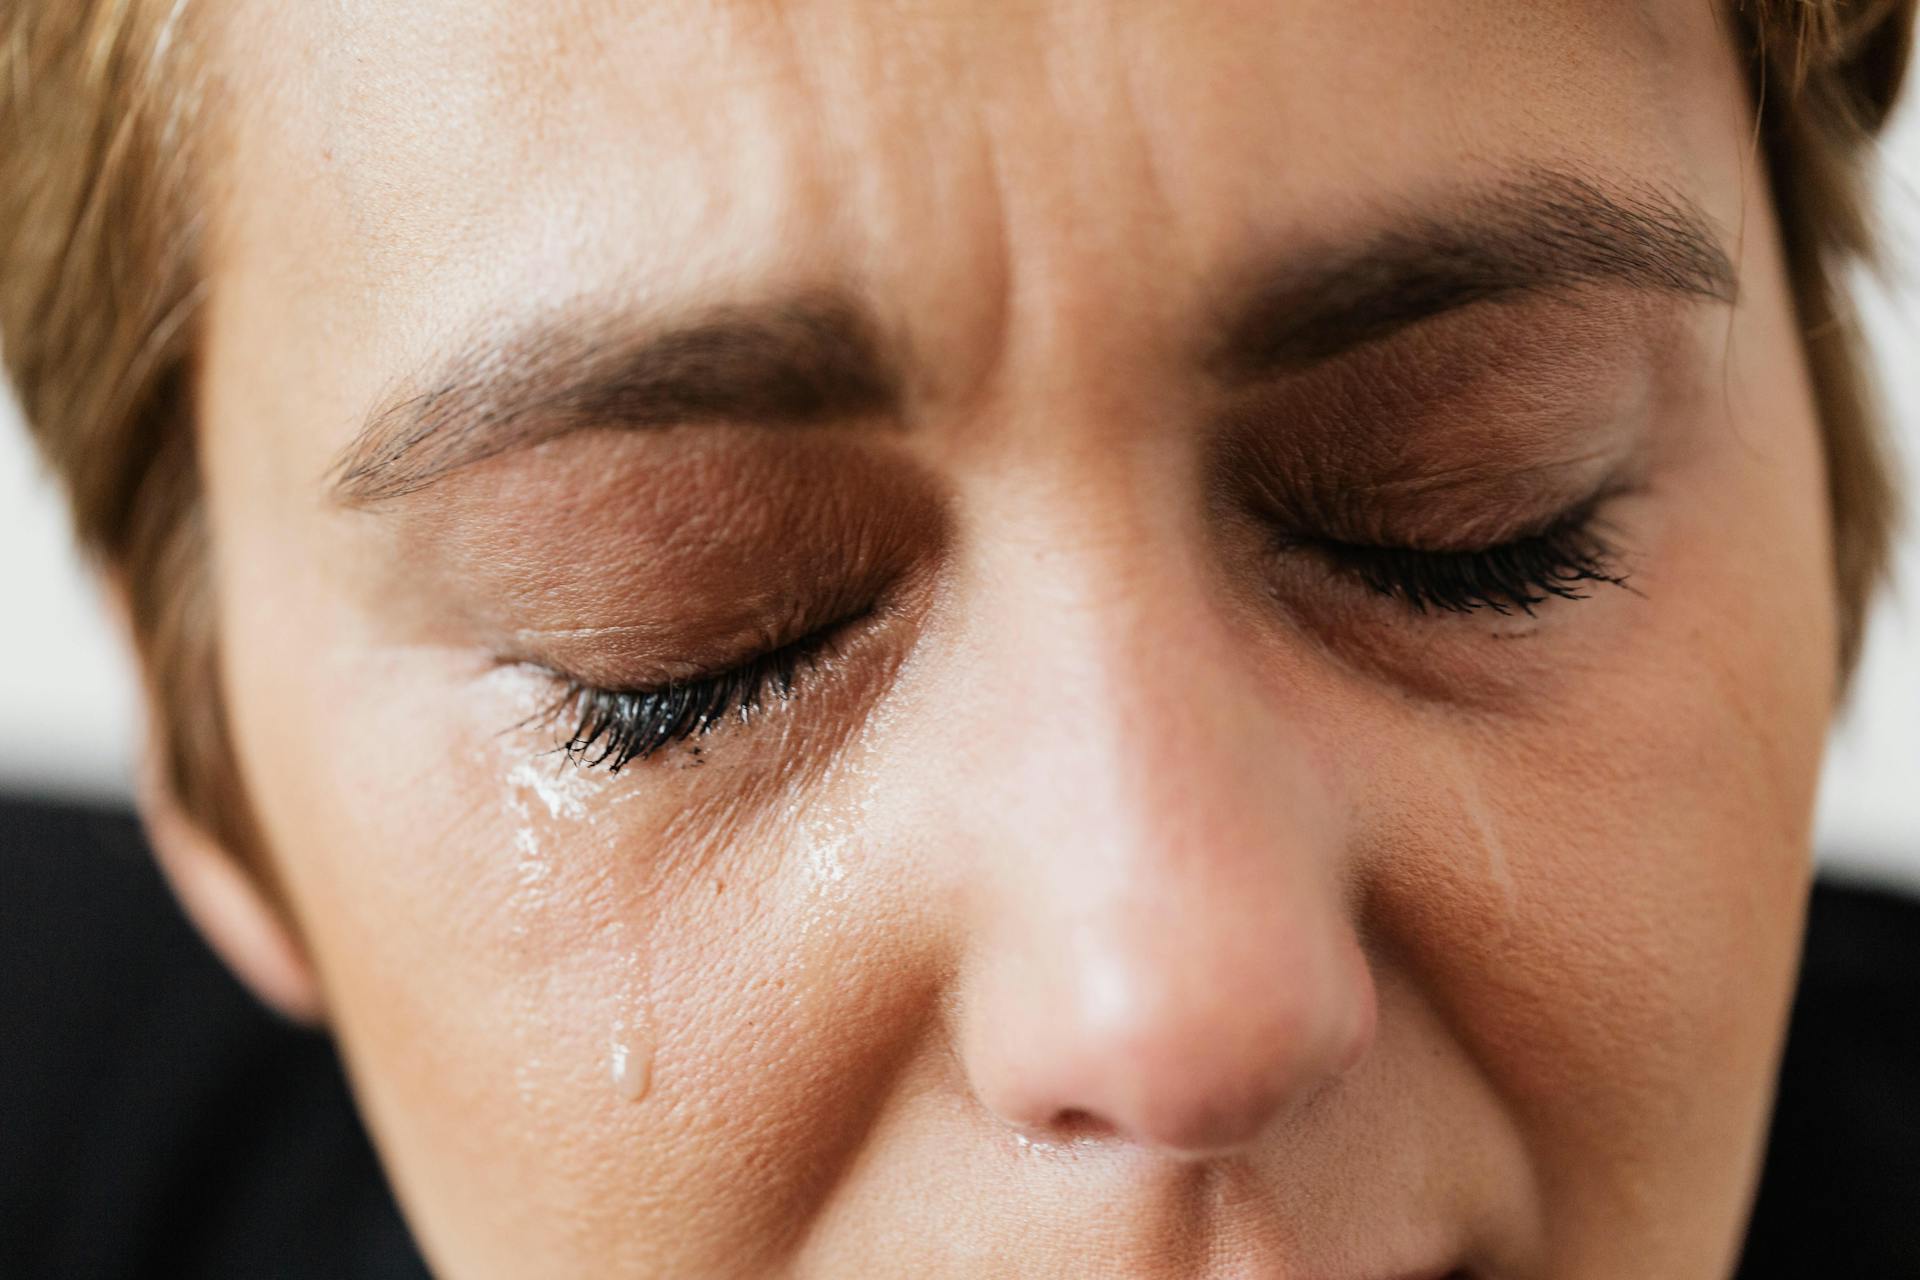 A crying woman | Source: Pexels